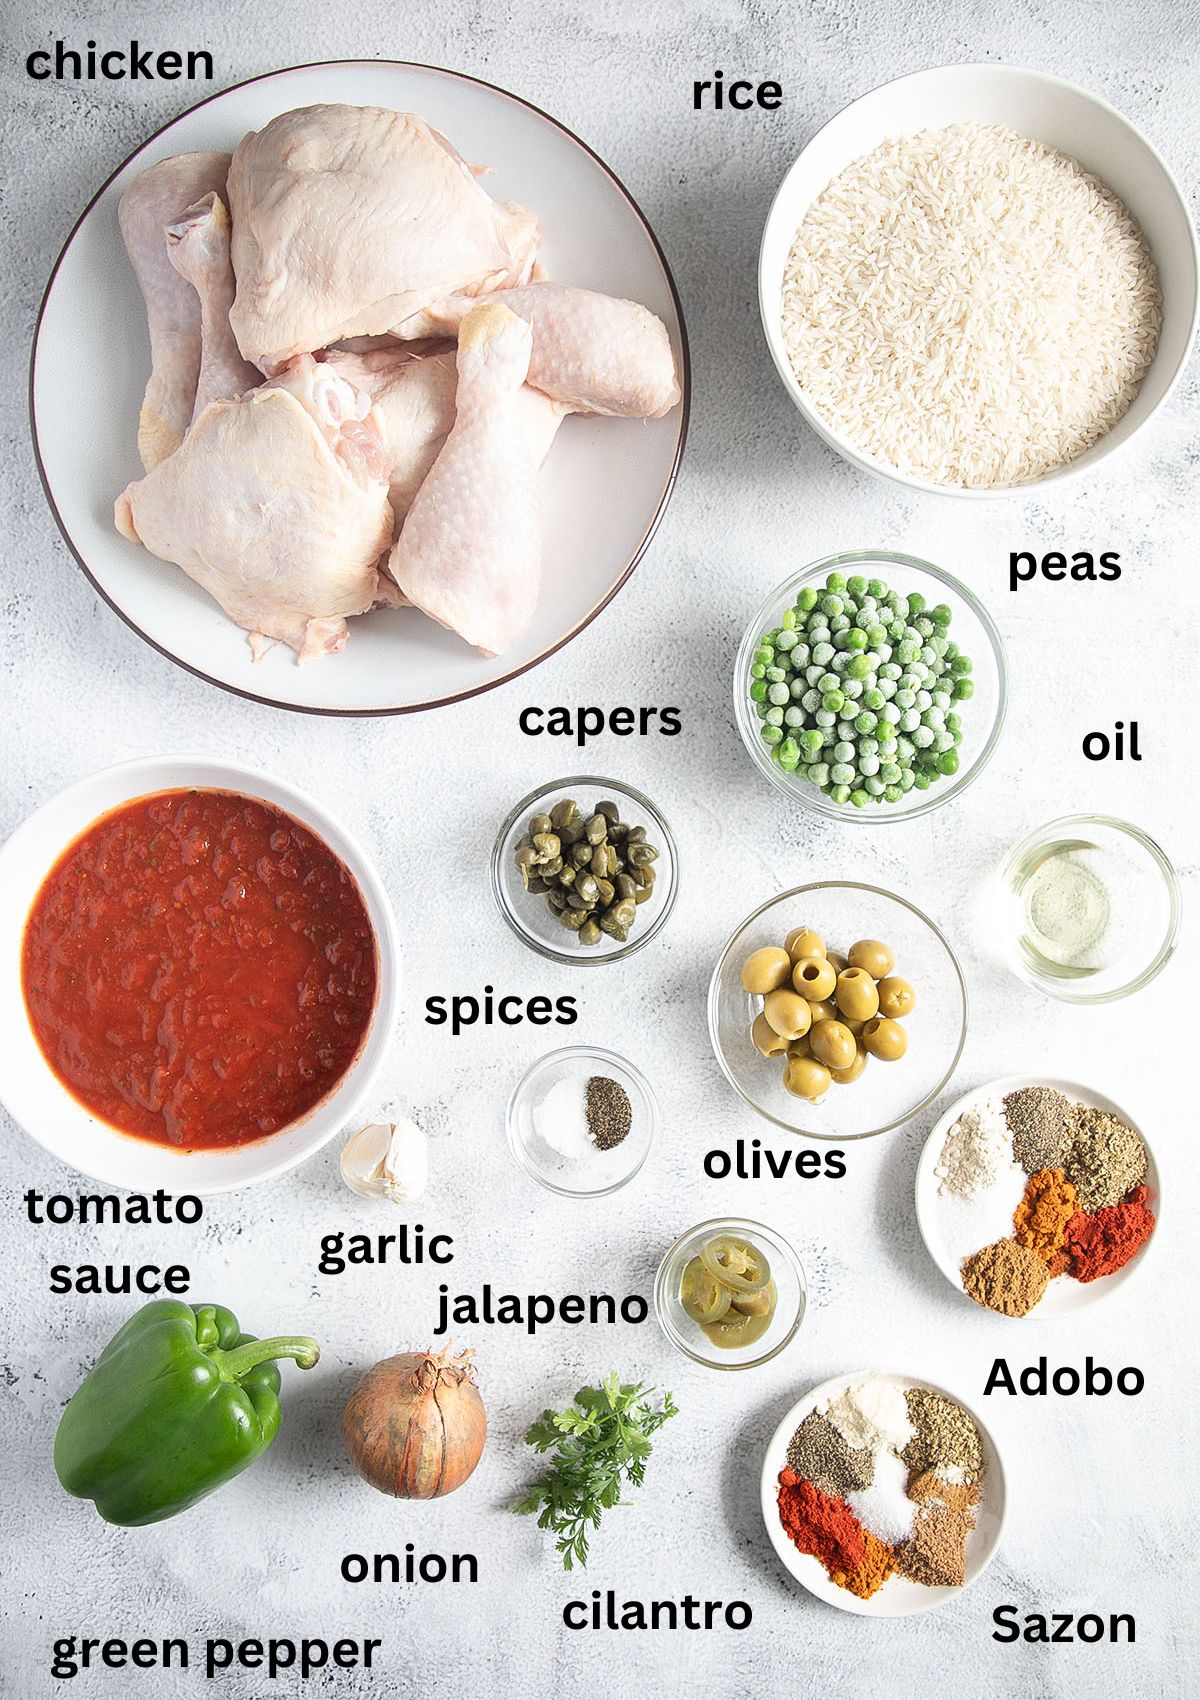 labeled ingredients for making rice with chicken legs, tomato sauce, olives, peas and sofrito.